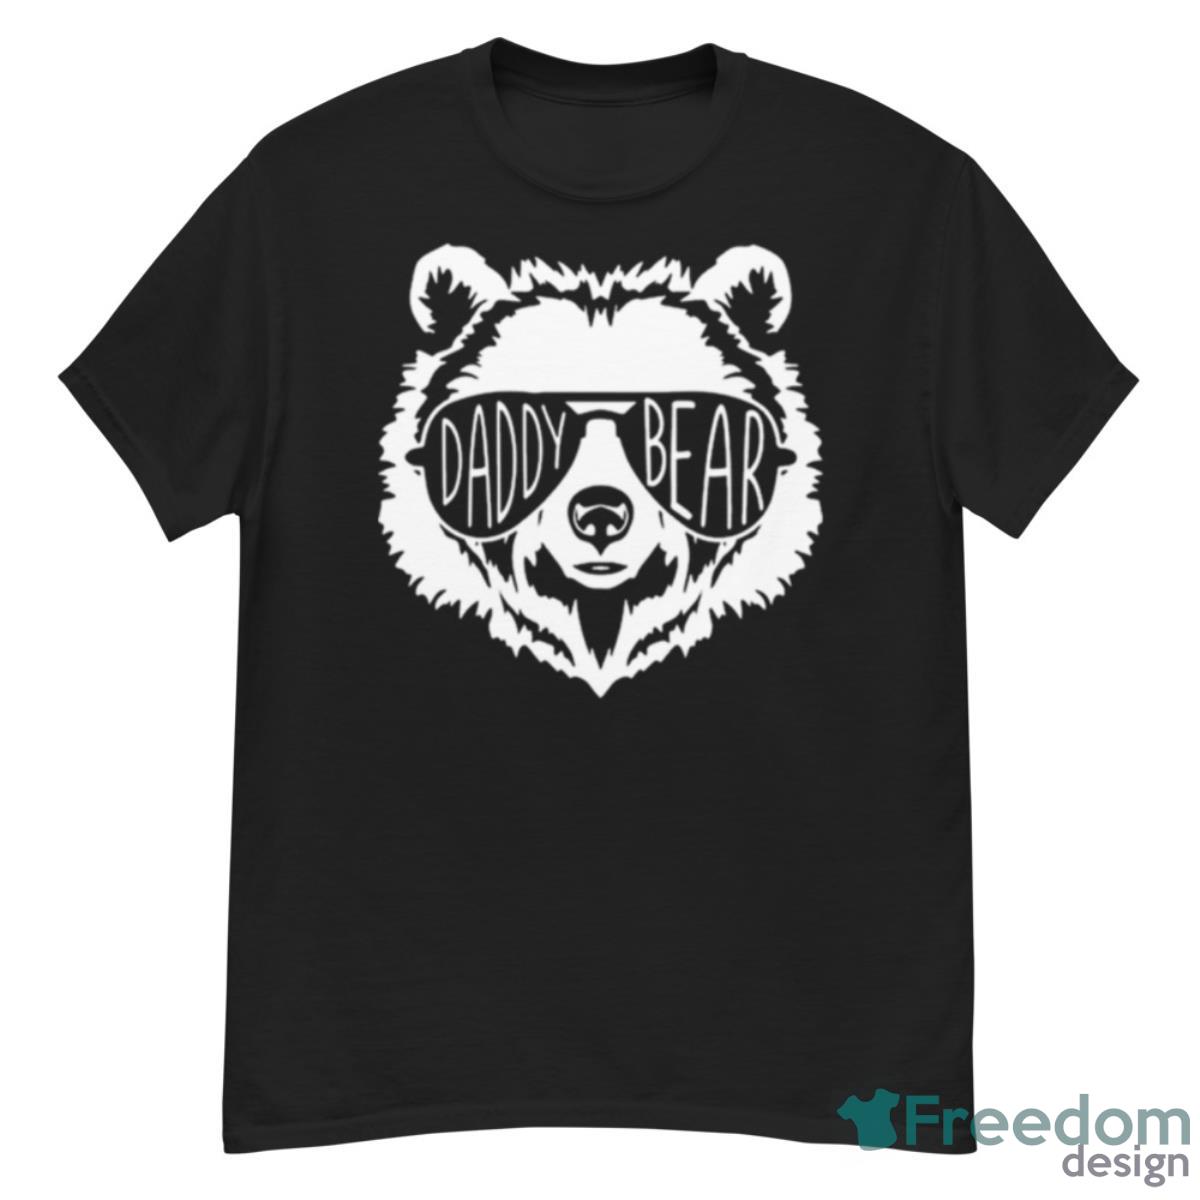 Daddy Bear Face With Sunglasses Cool Shirt - G500 Men’s Classic T-Shirt